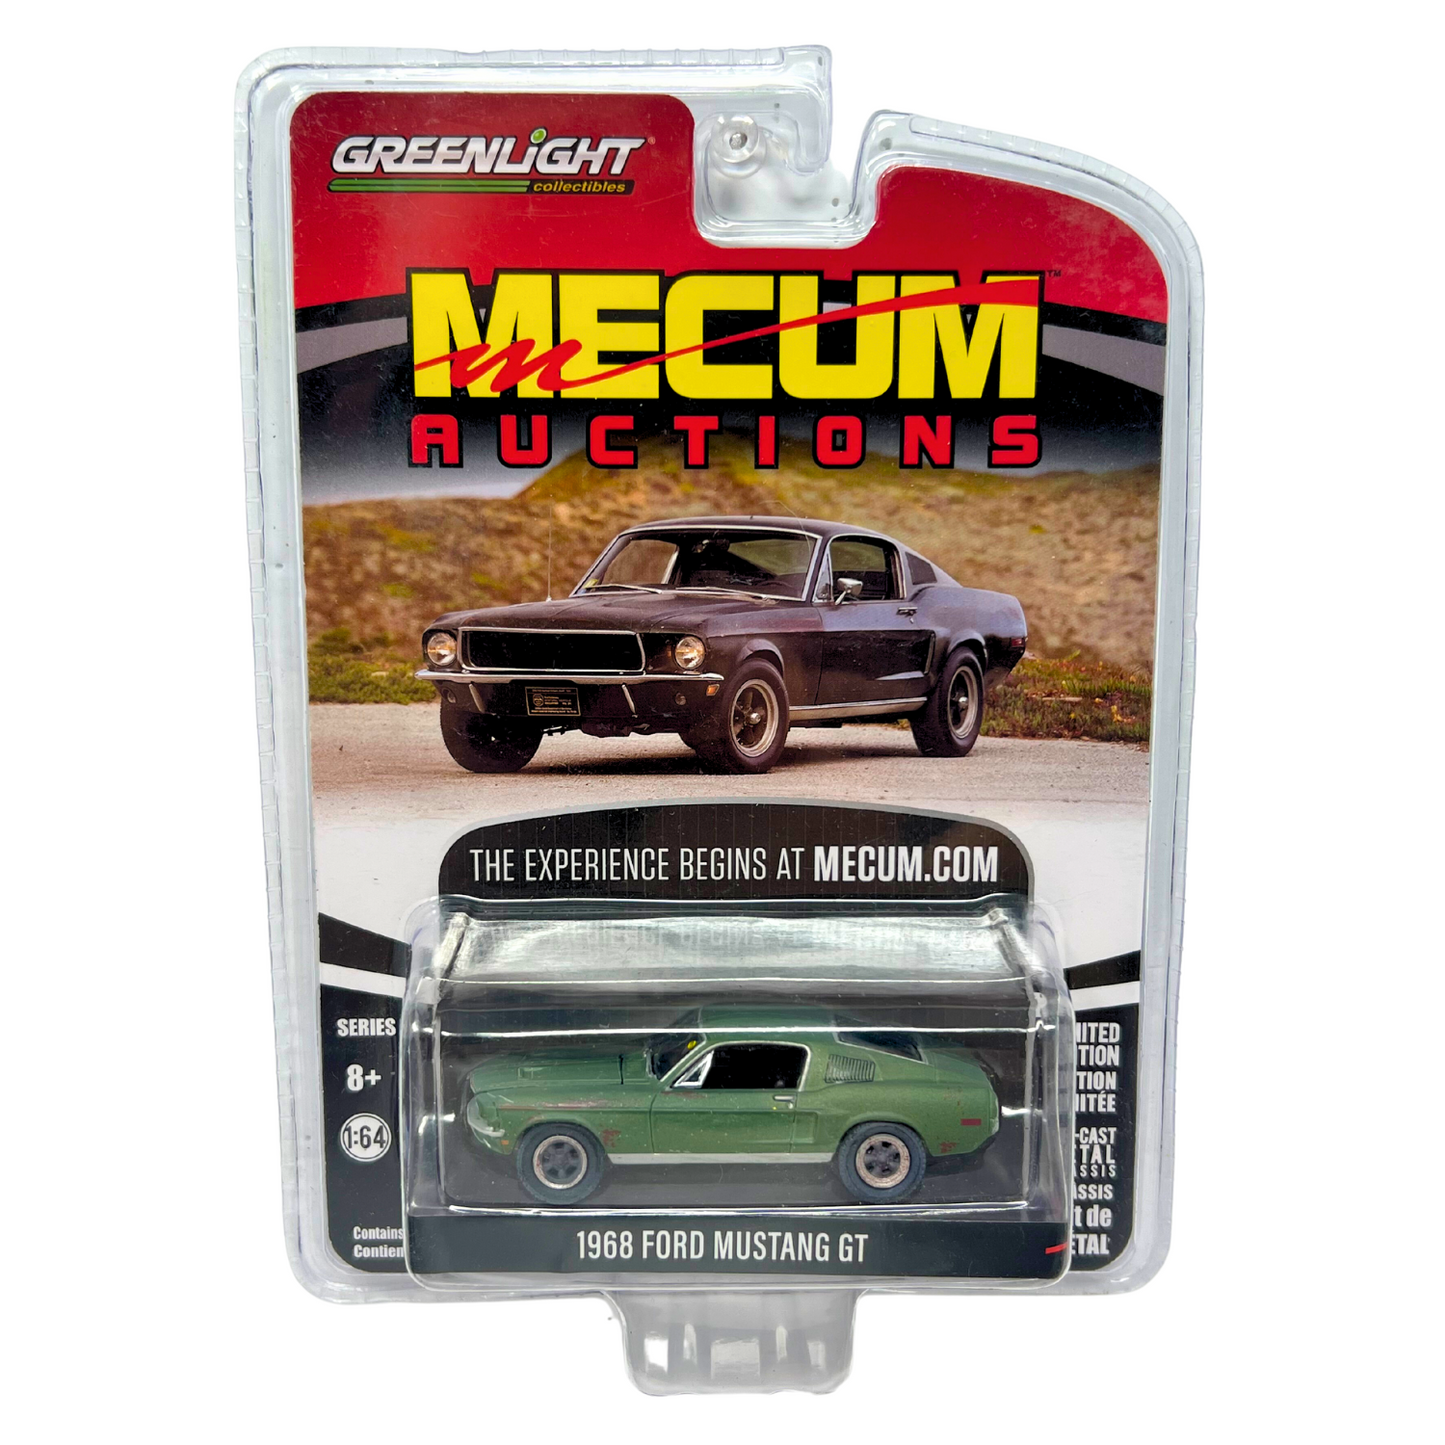 Greenlight Mecum Auctions Series 5 1968 Ford Mustang GT 1:64 Diecast